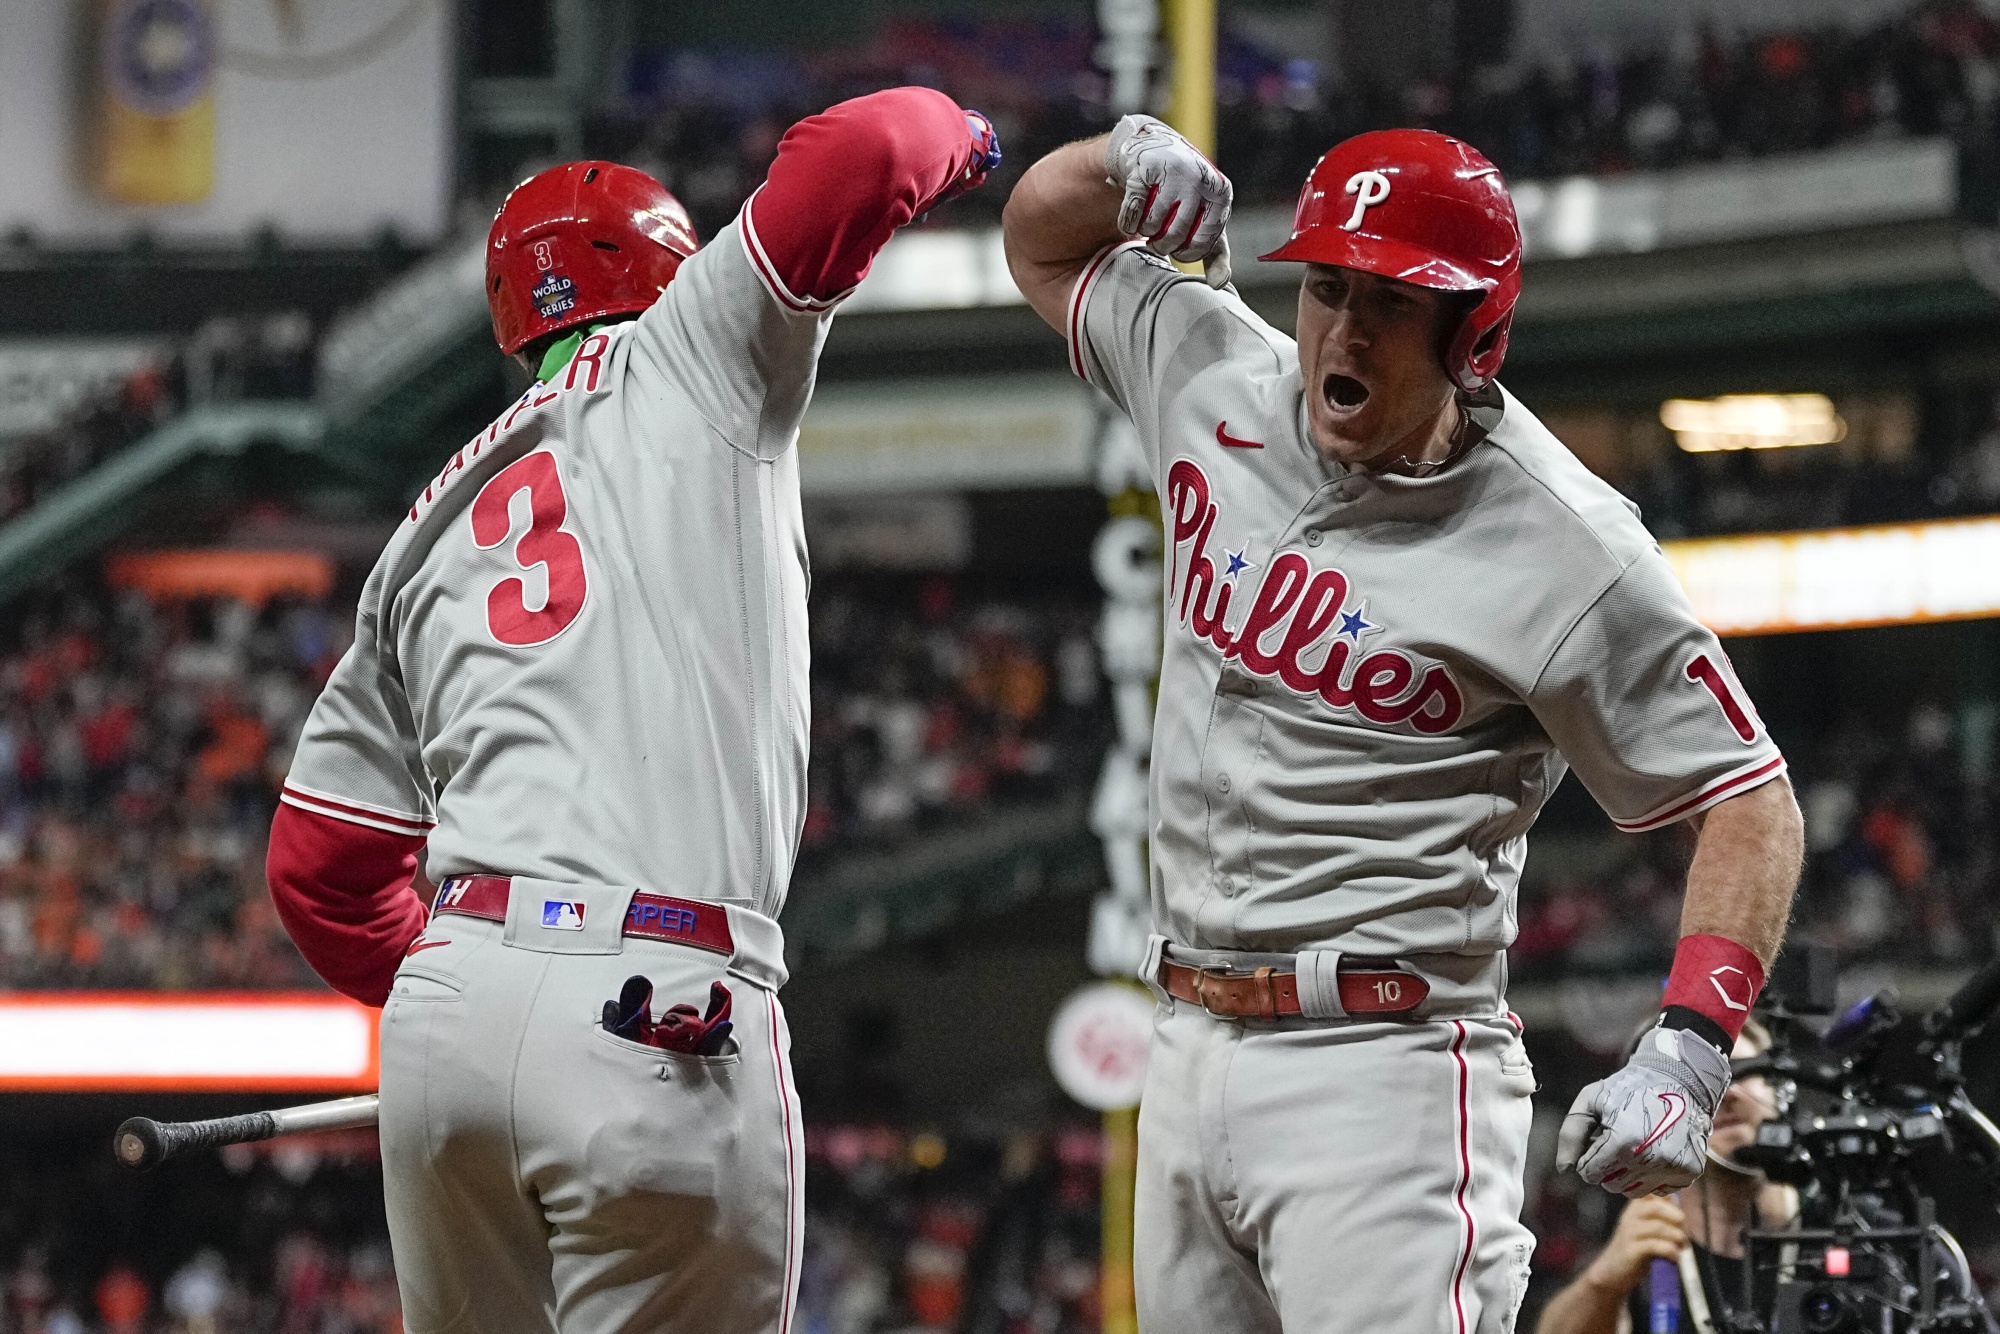 The Philadelphia Phillies and Houston Astros are headed to the World Series